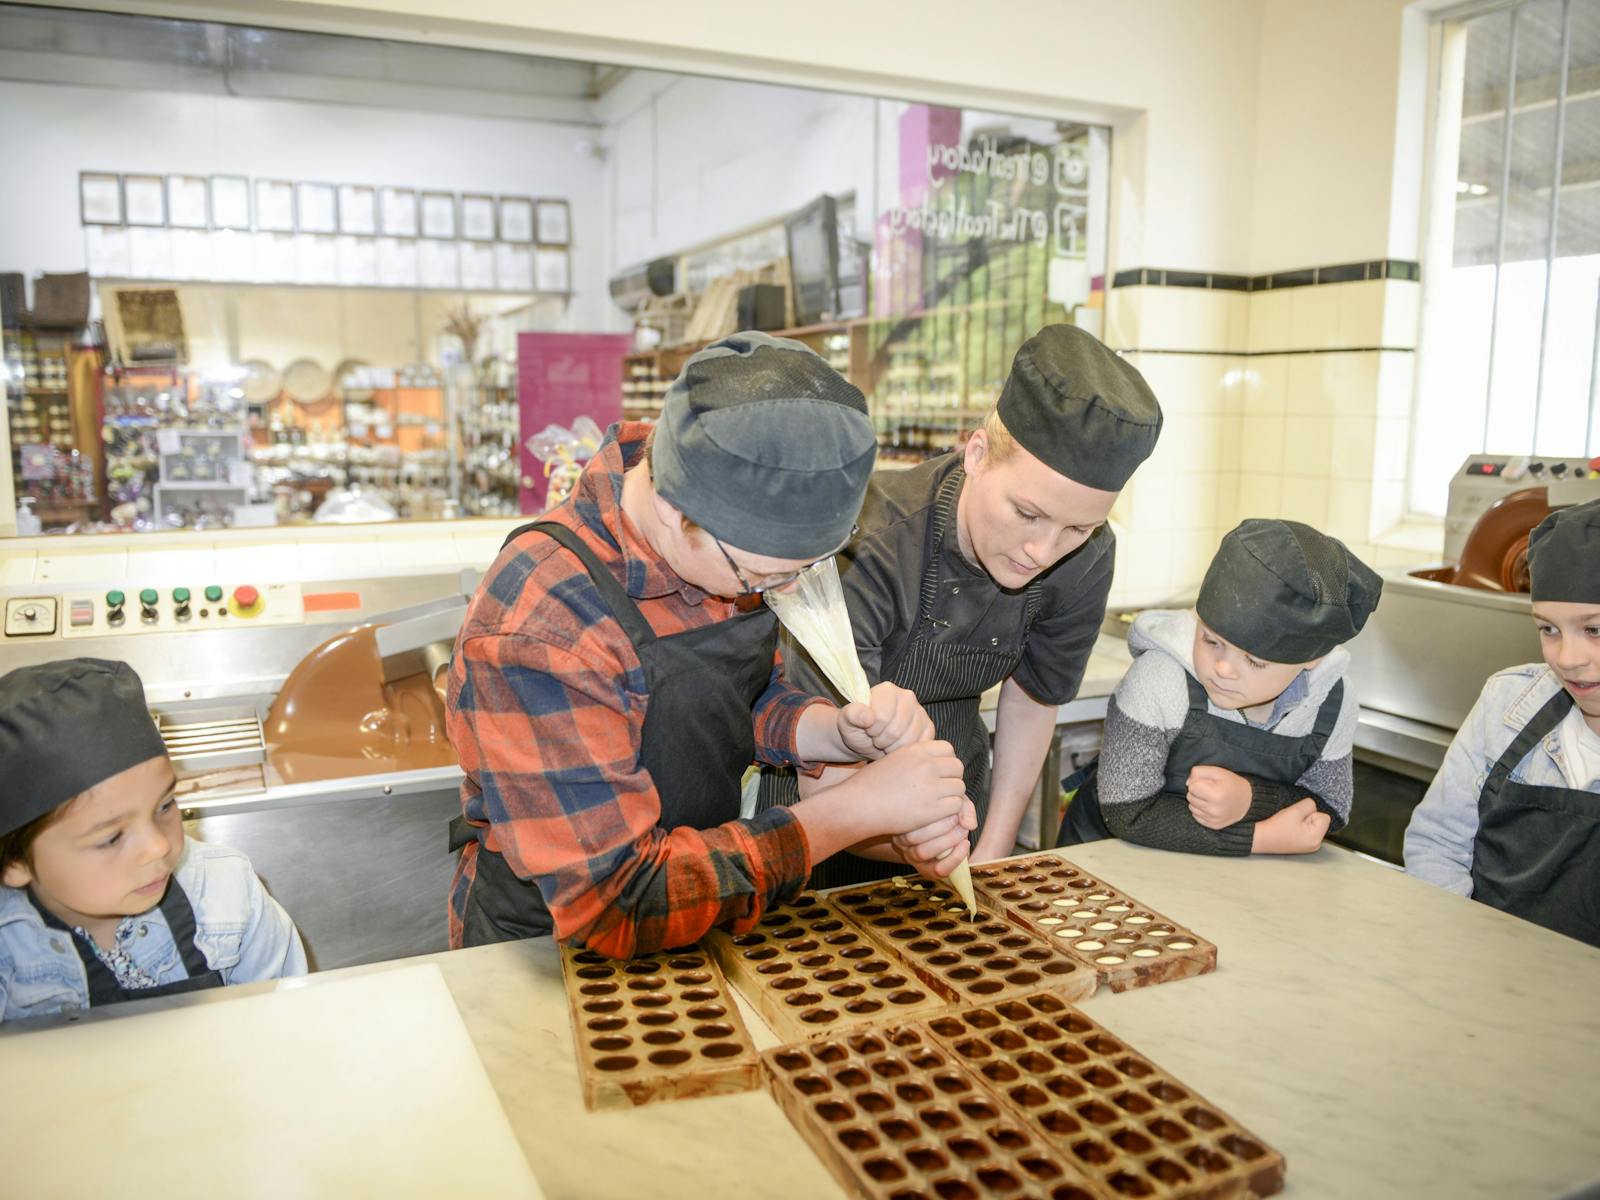 Kids Chocolate Workshops at The Treat Factory